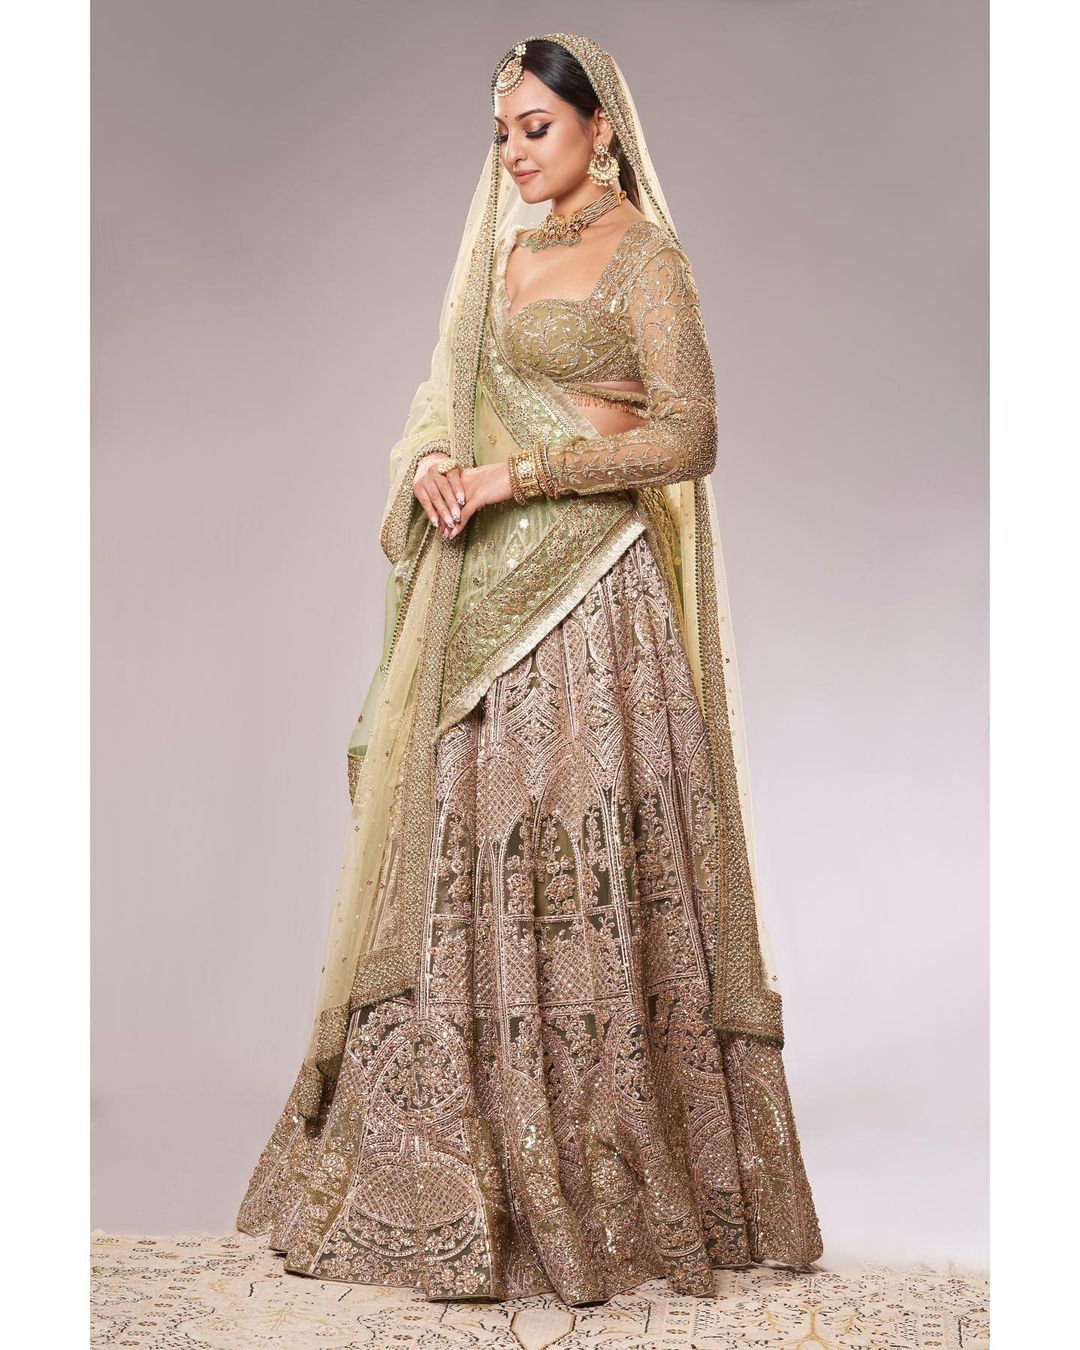 Sonakshi Sinha is attracting everyone with her unique bridal lehenga look 5858